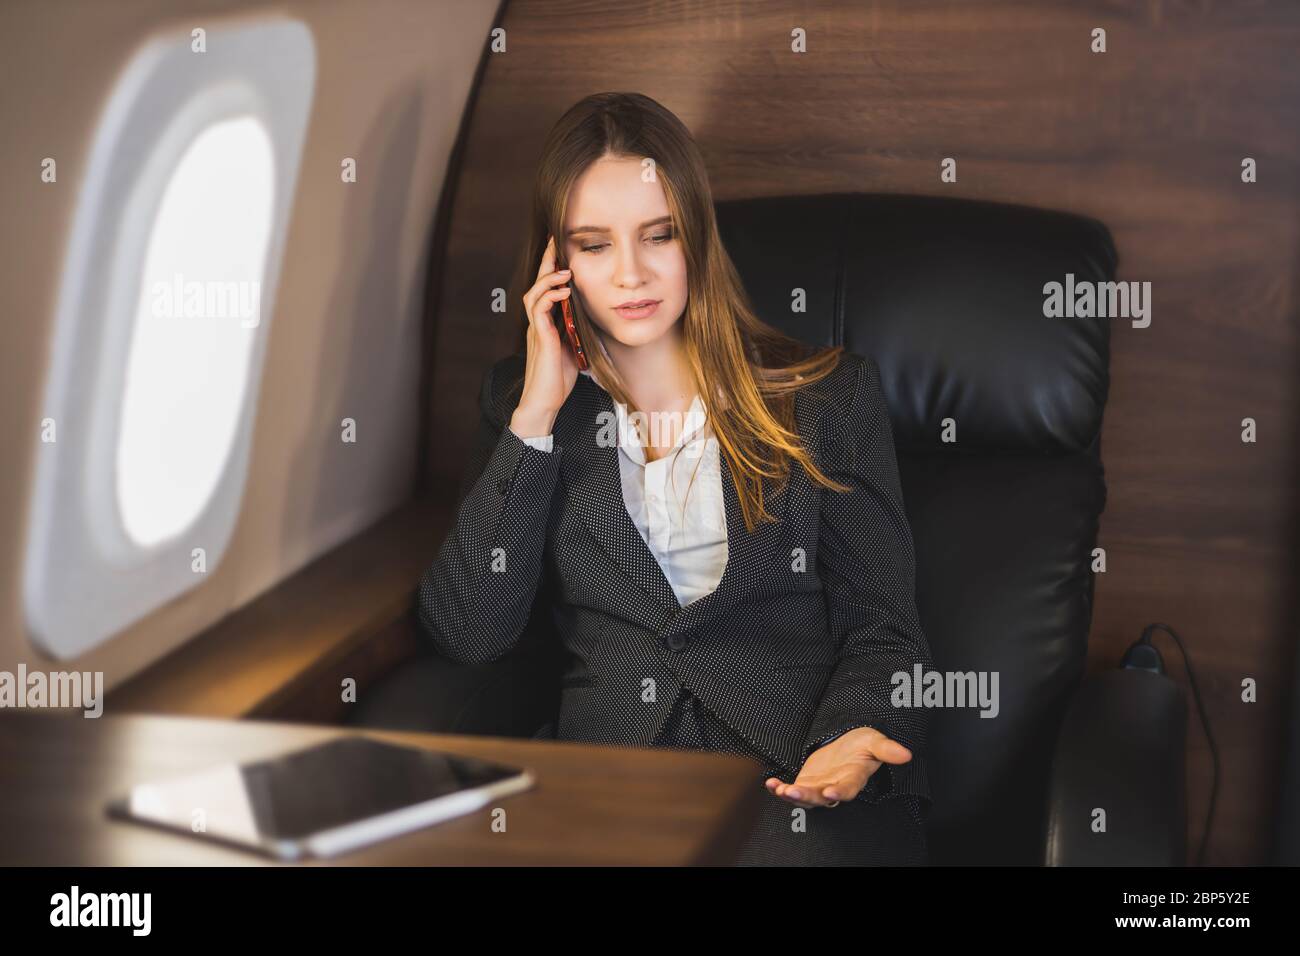 Attractive nervous young caucasian businesswoman is talking on the phone with an irritated facial expression, gesturing, sitting on a private plane. B Stock Photo